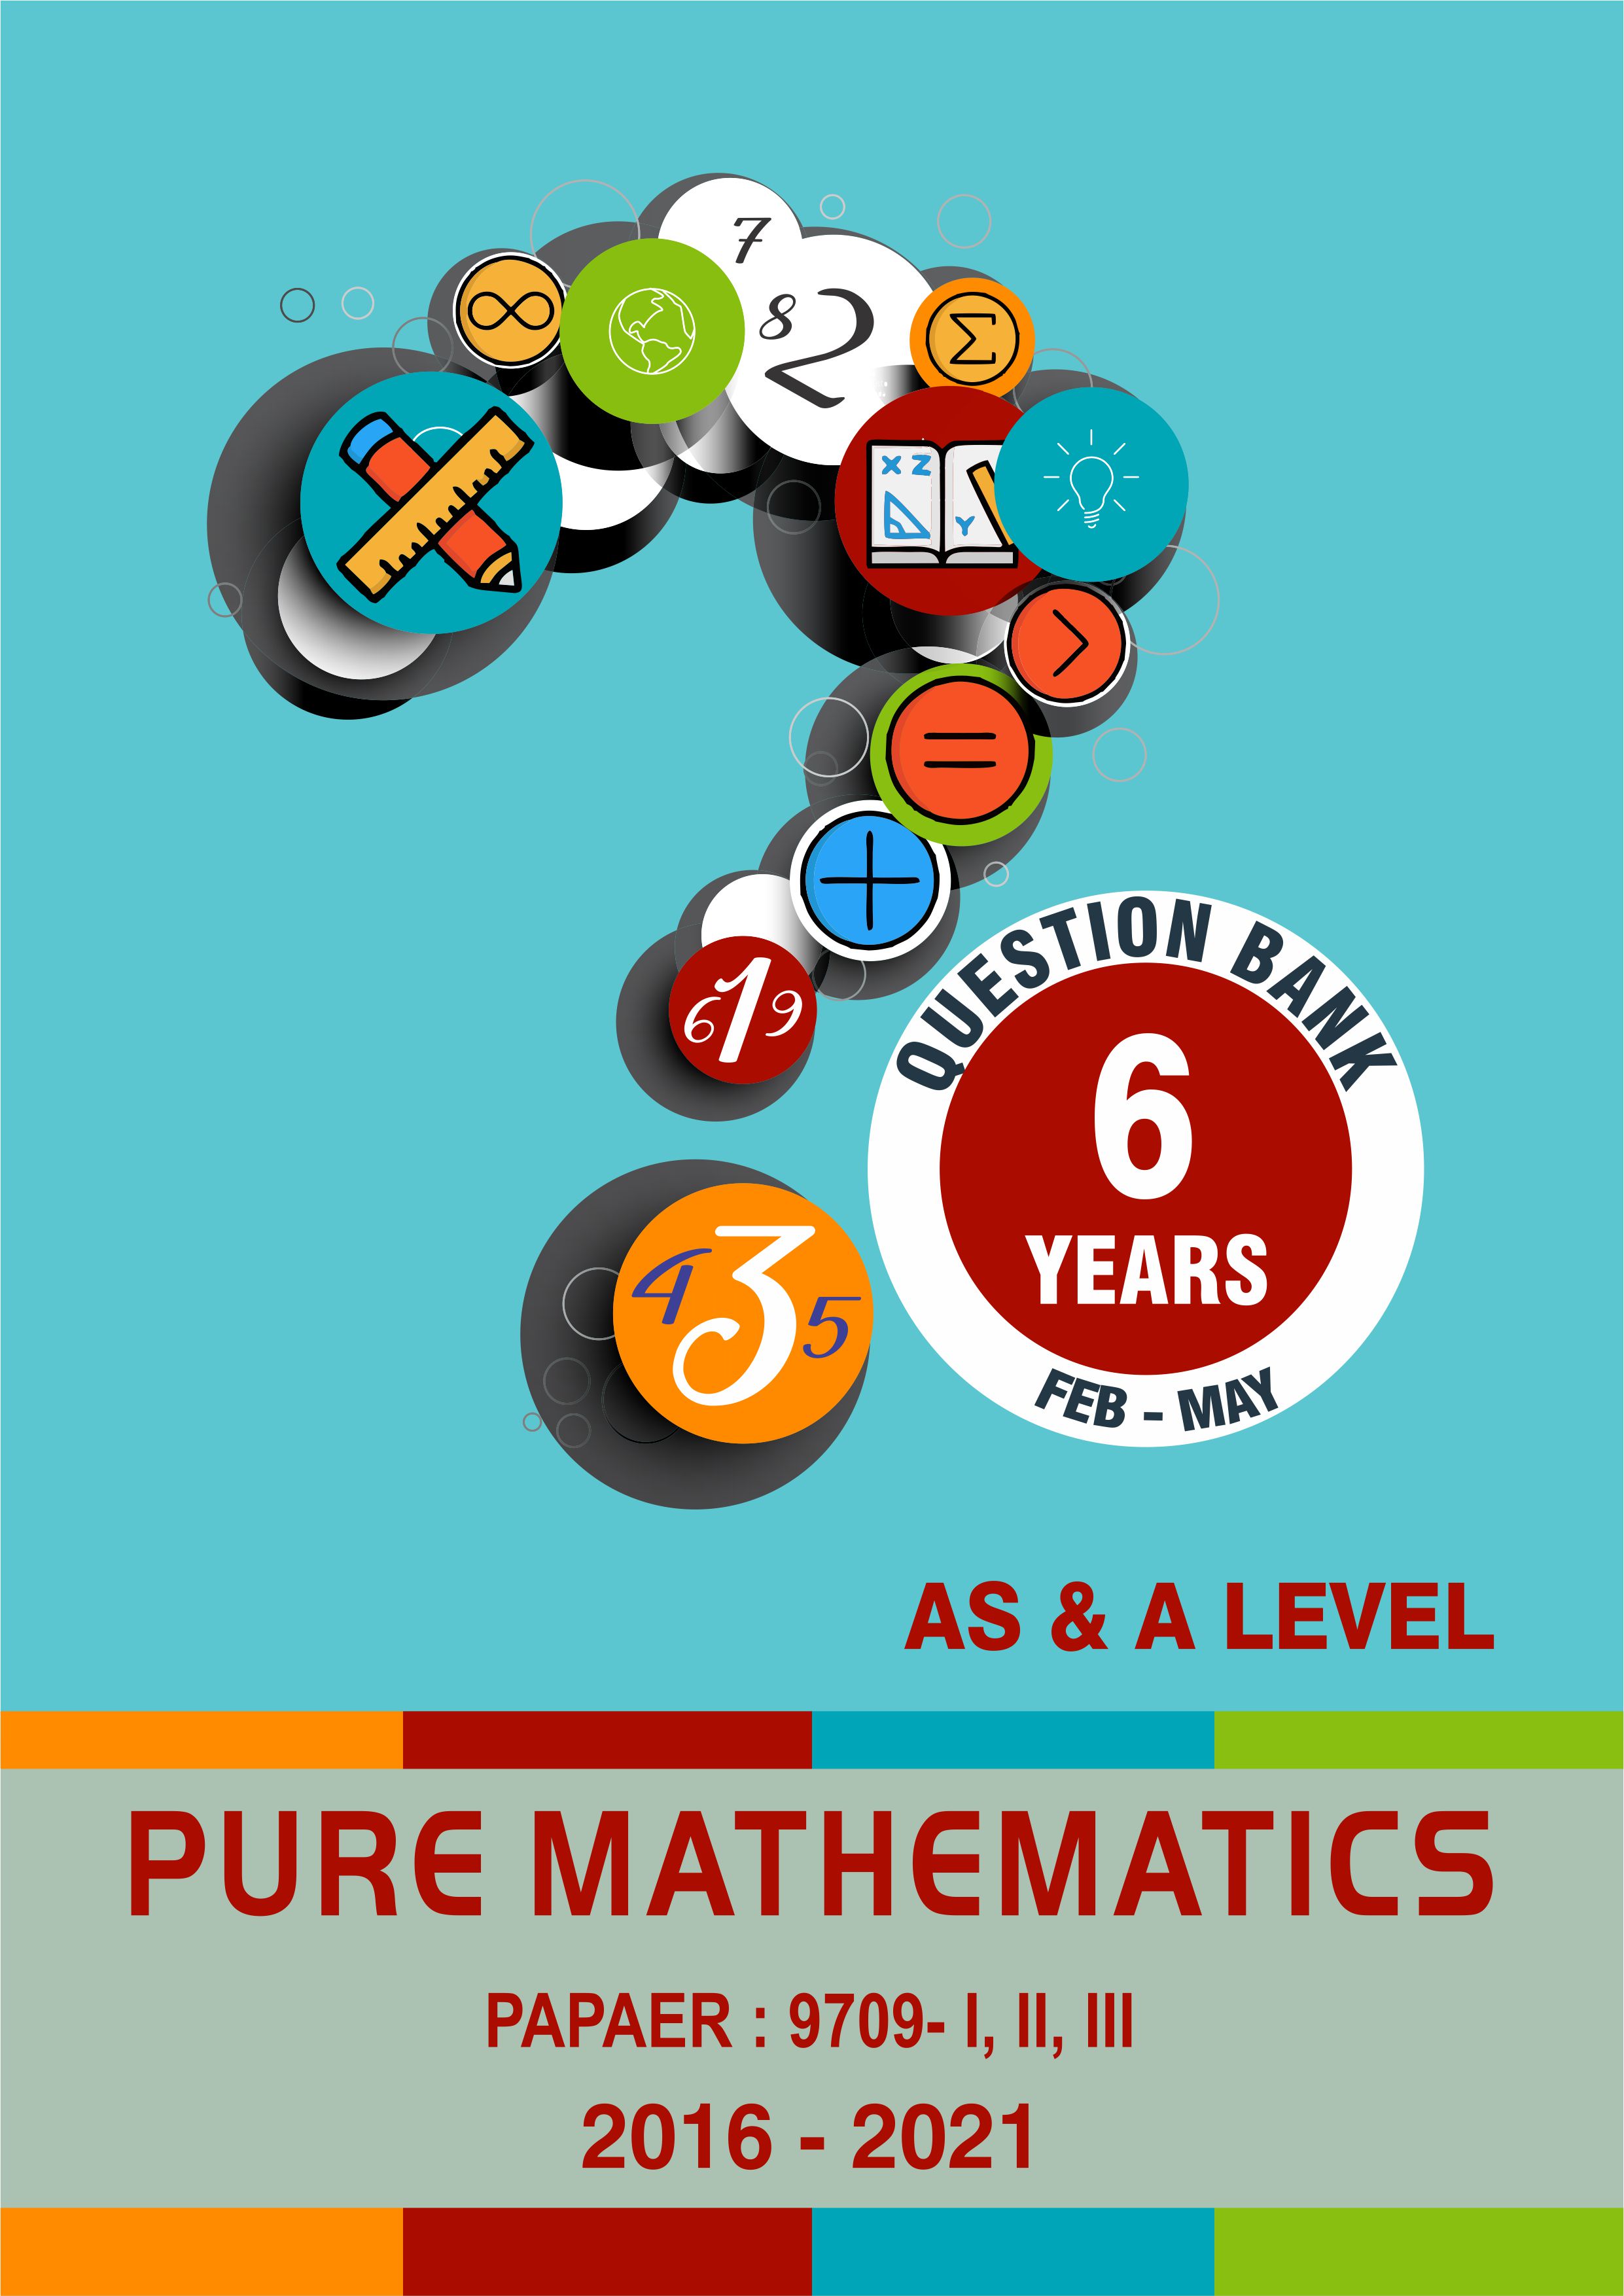 As & A Level Question Bank With Marking Schemes- Pure Mathematics Paper Code 9709 Past 6 Years